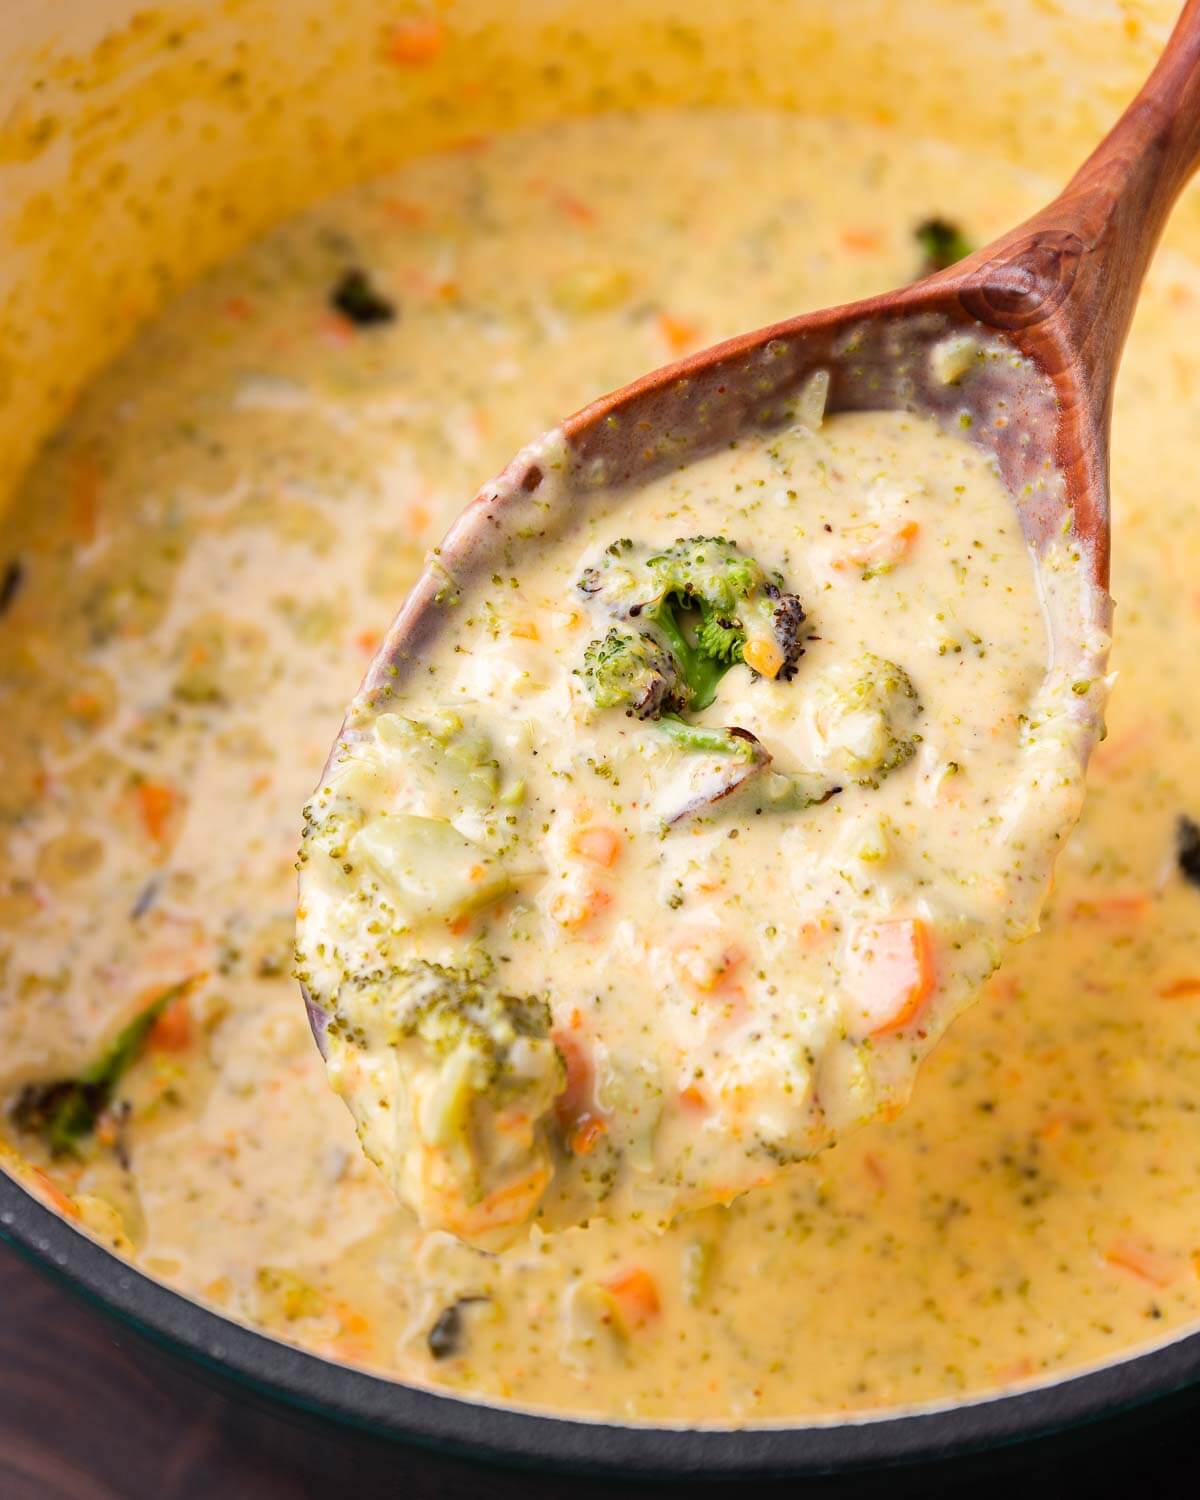 Large wooden ladle with broccoli cheddar soup.